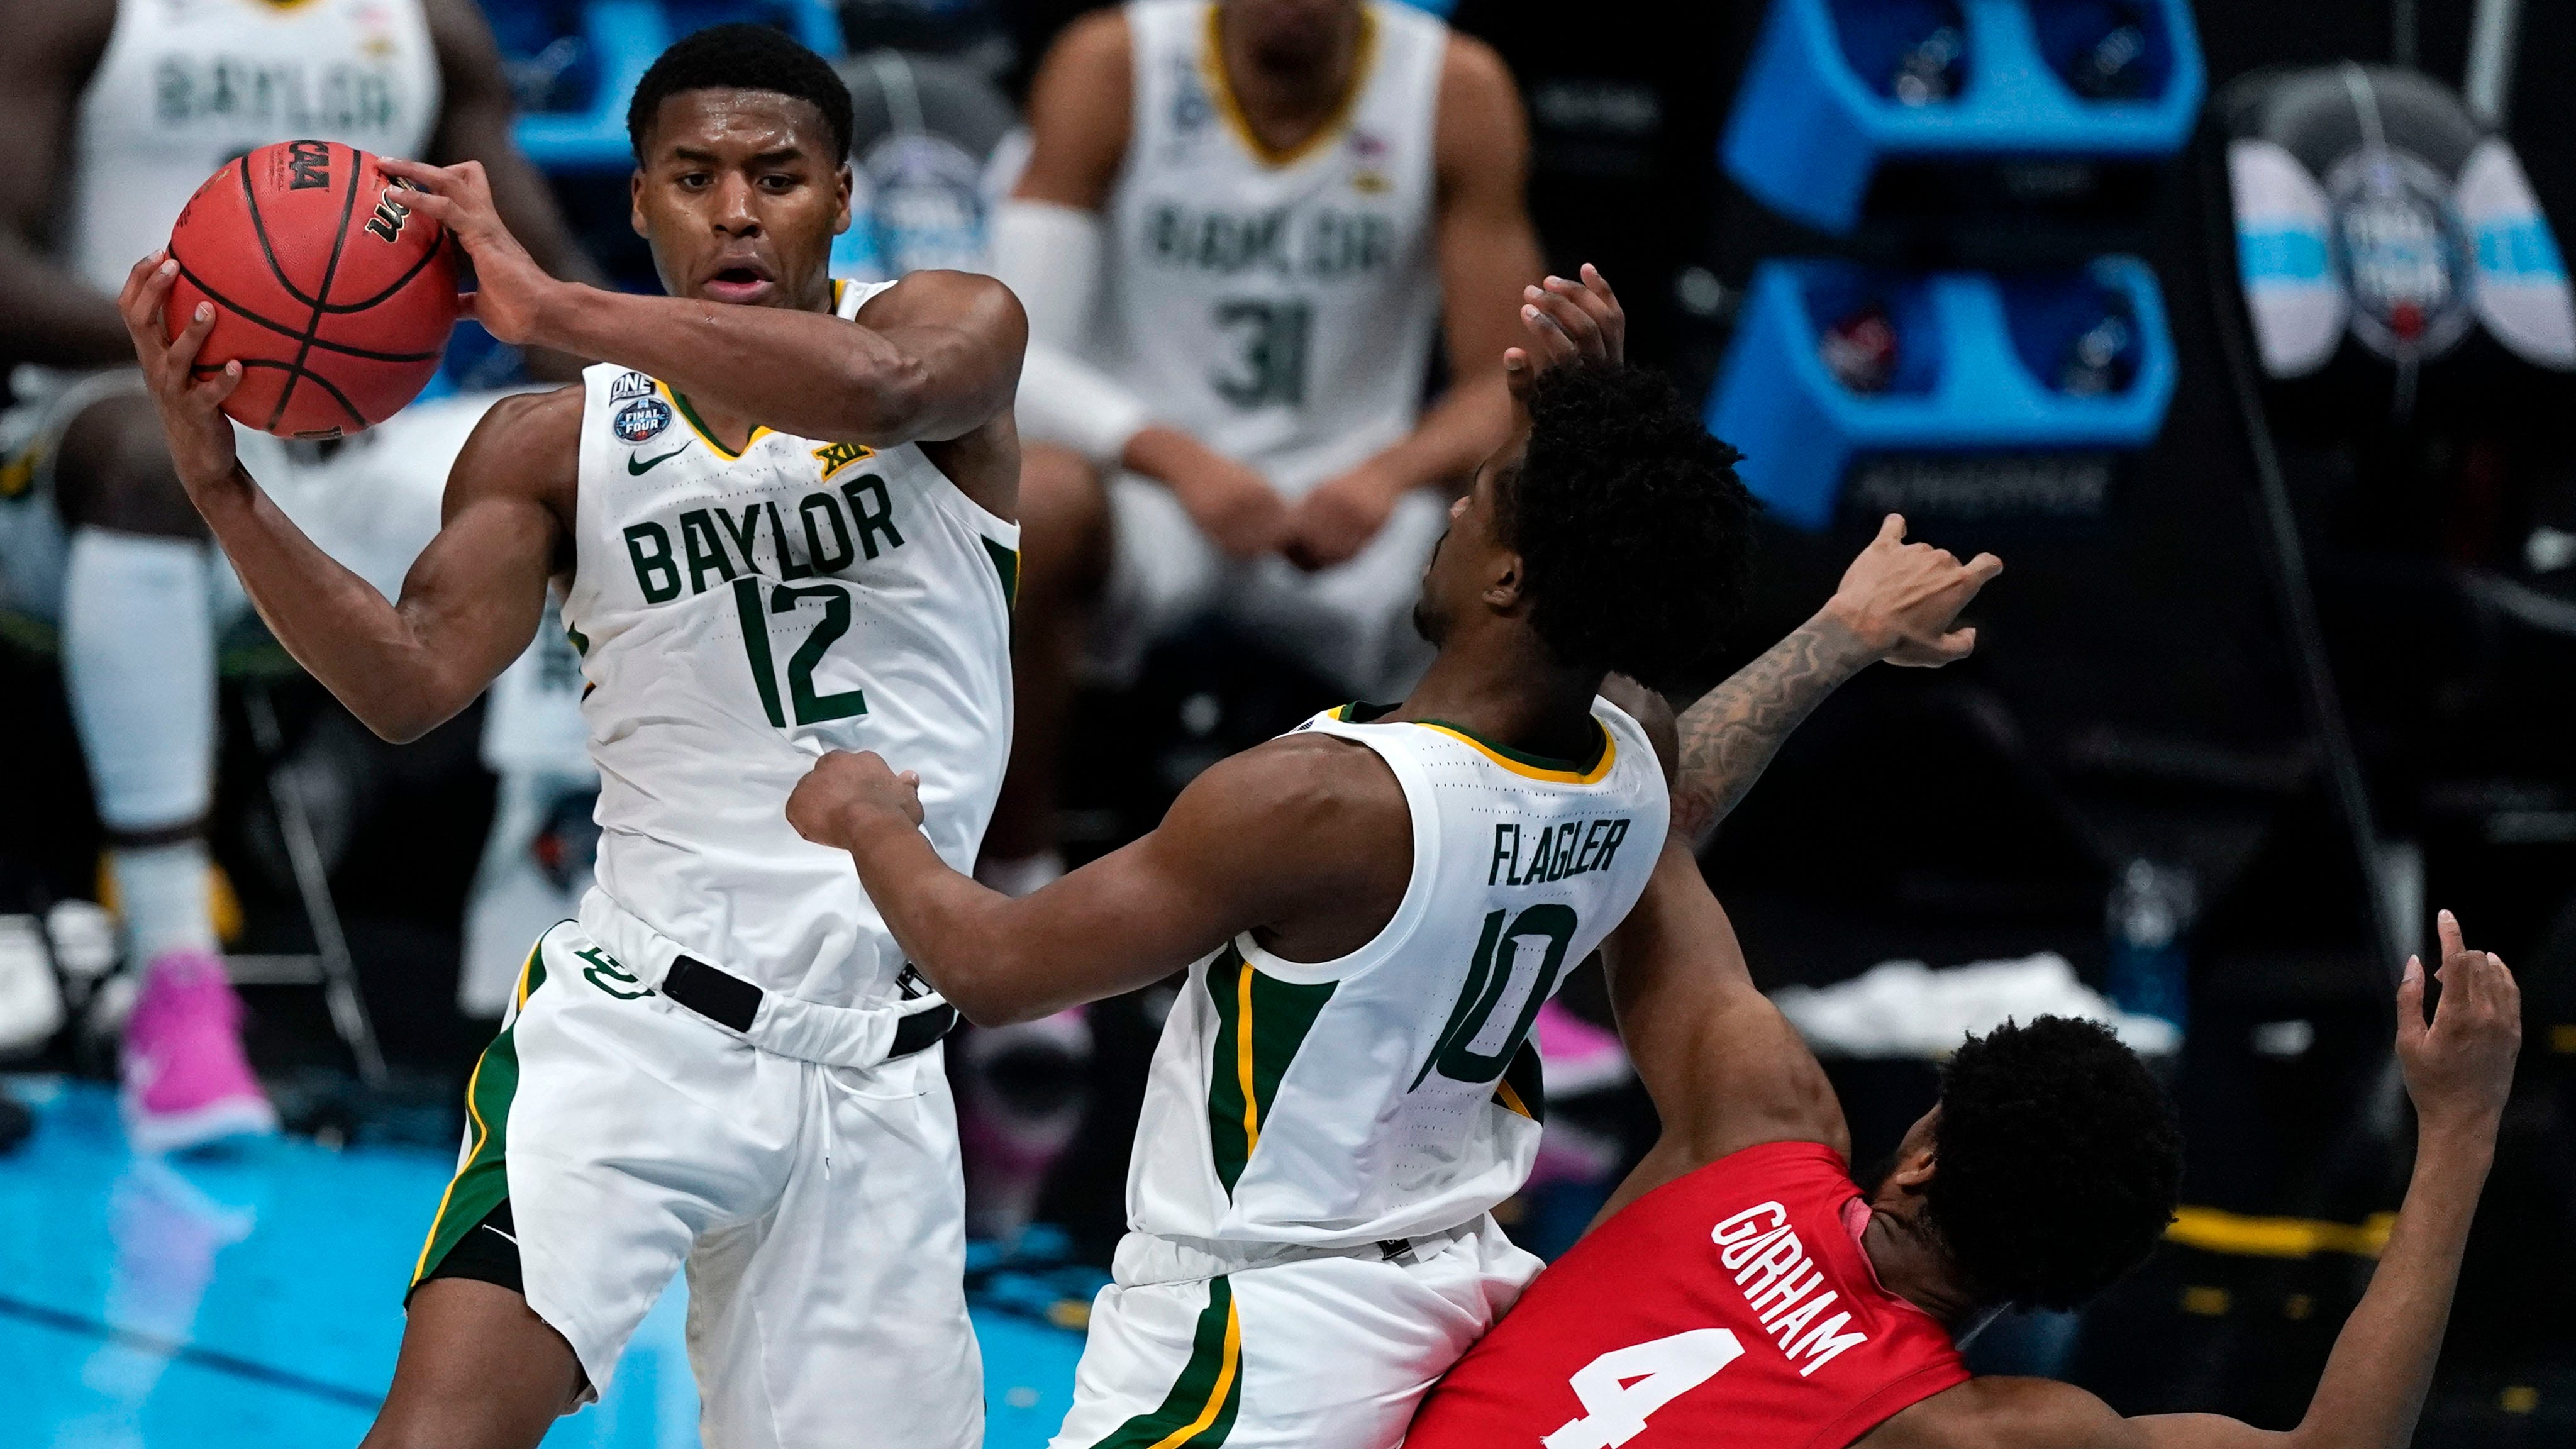 Baylor take first place in Houston in the Final Four to advance to NCAA Tournament